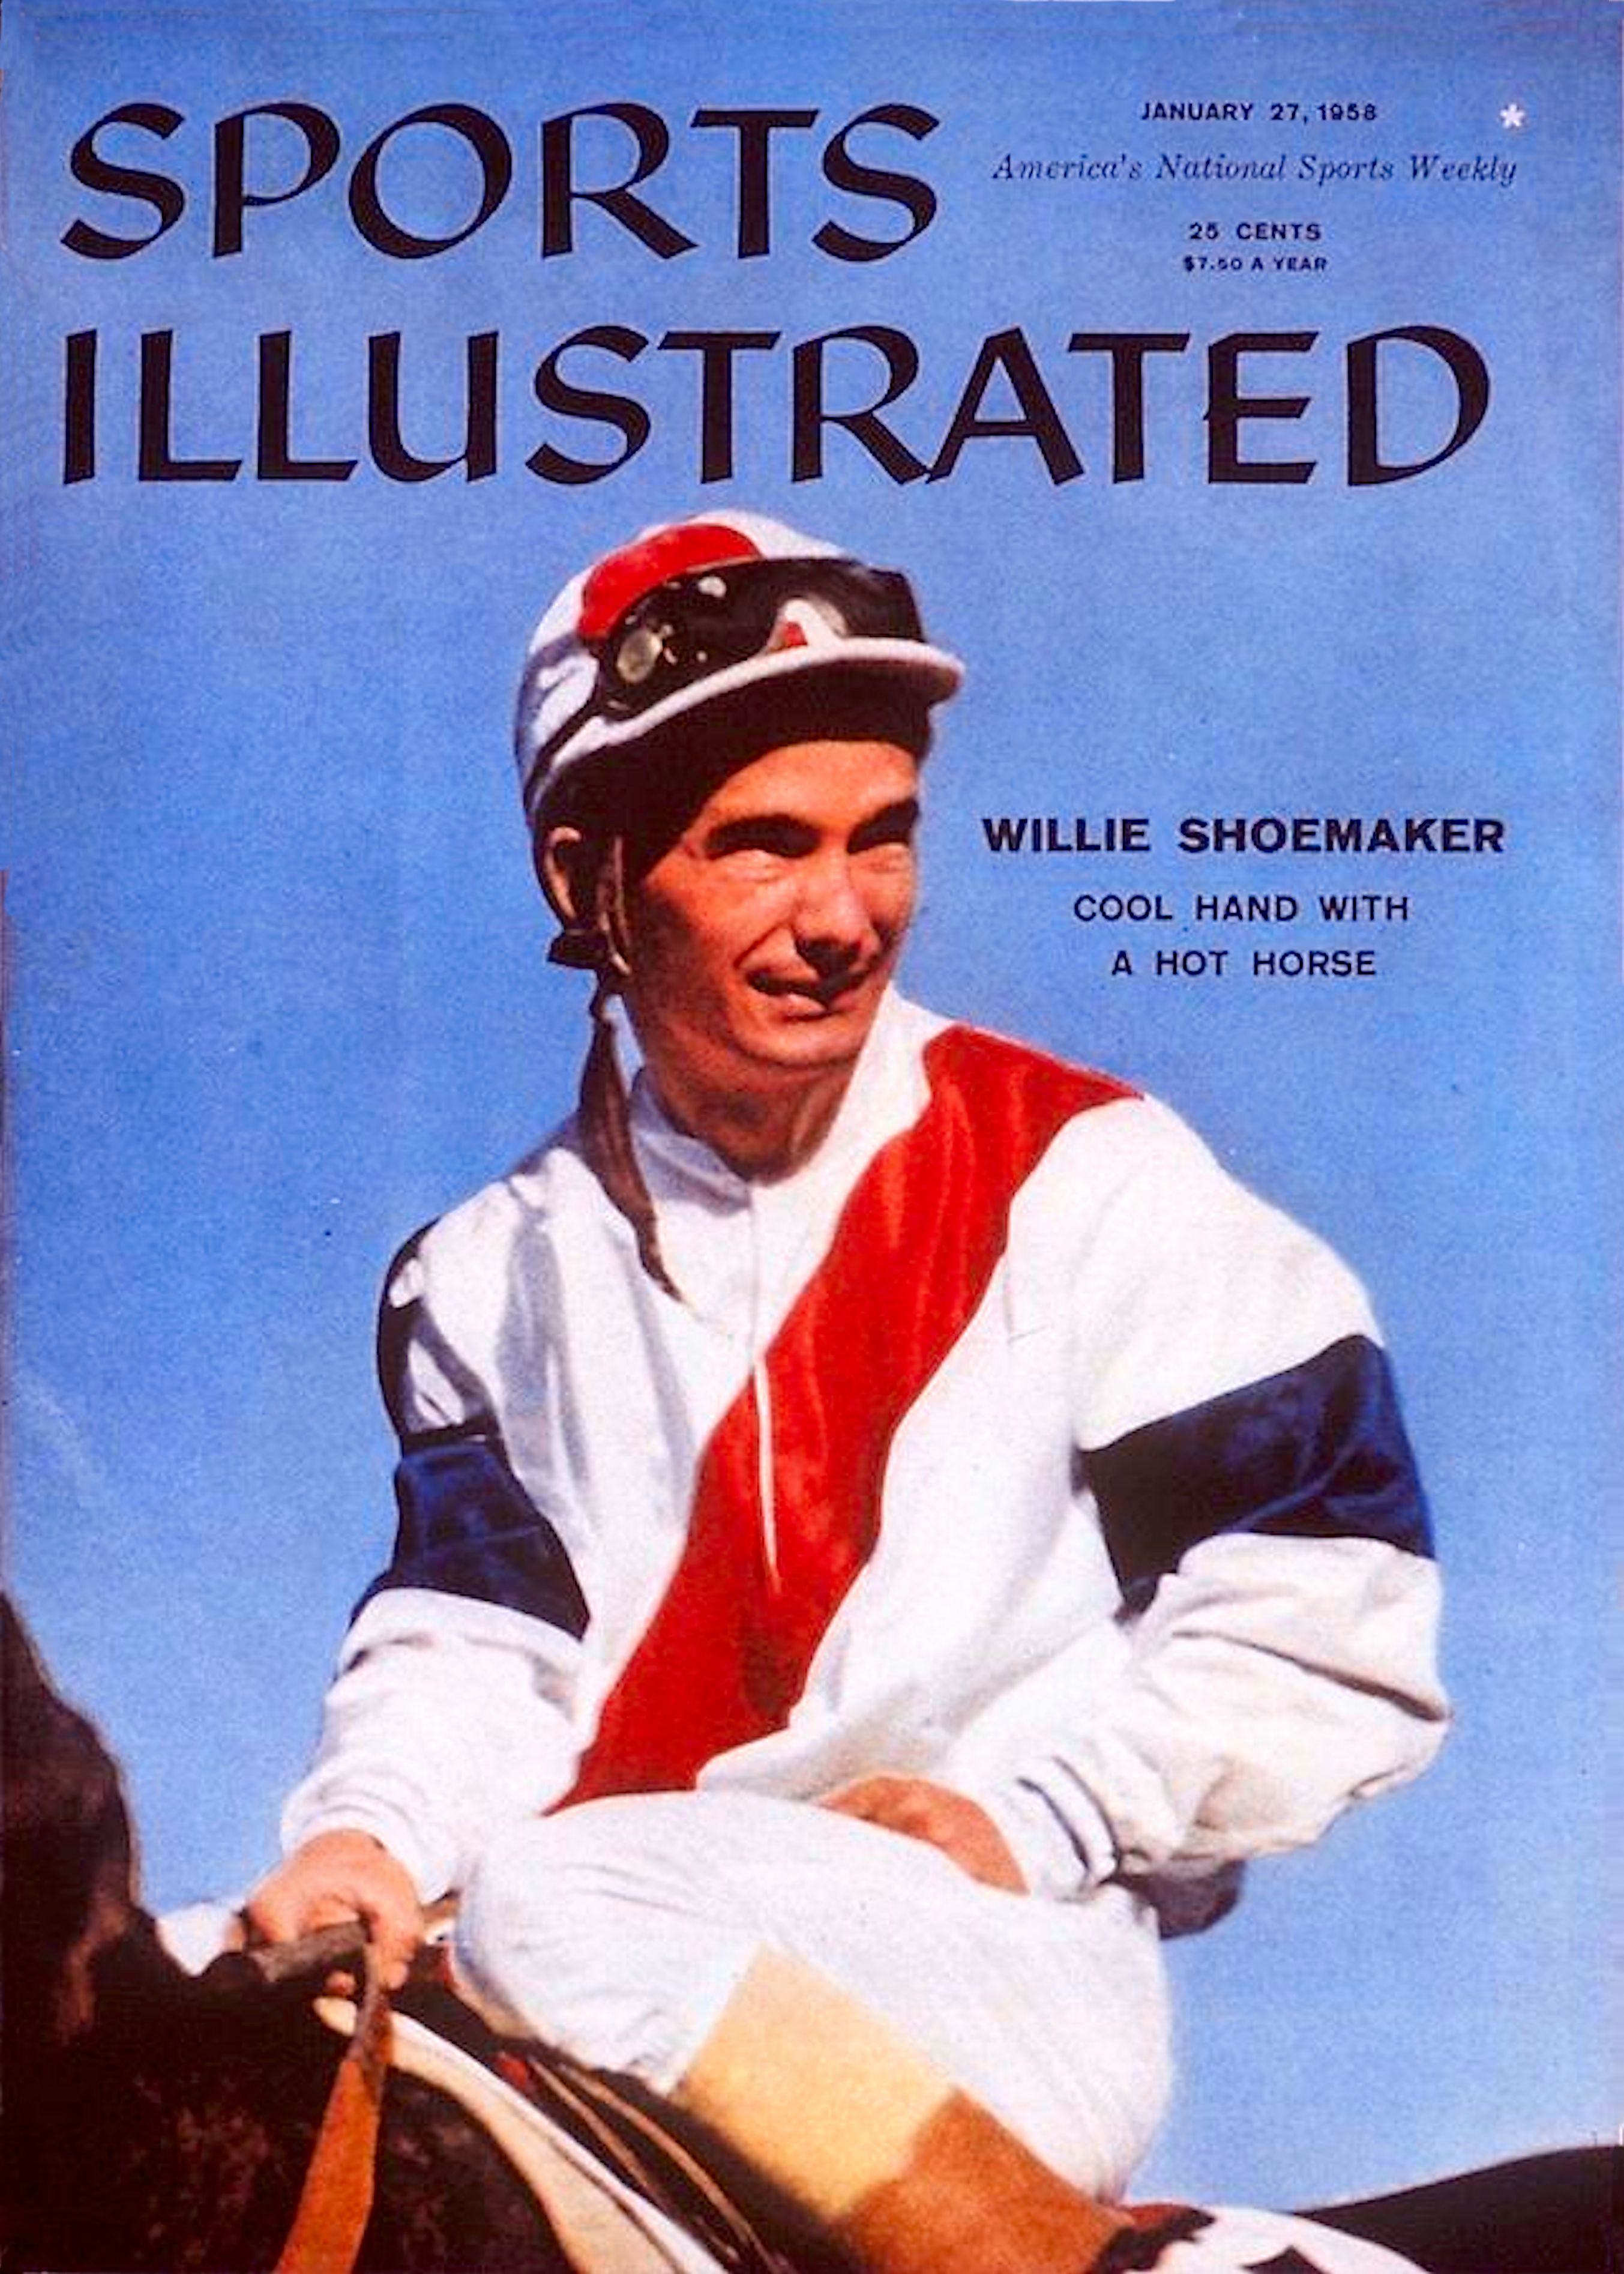 Bill Shoemaker on the cover of "Sports Illustrated" in 1958 (Sports Illustrated)